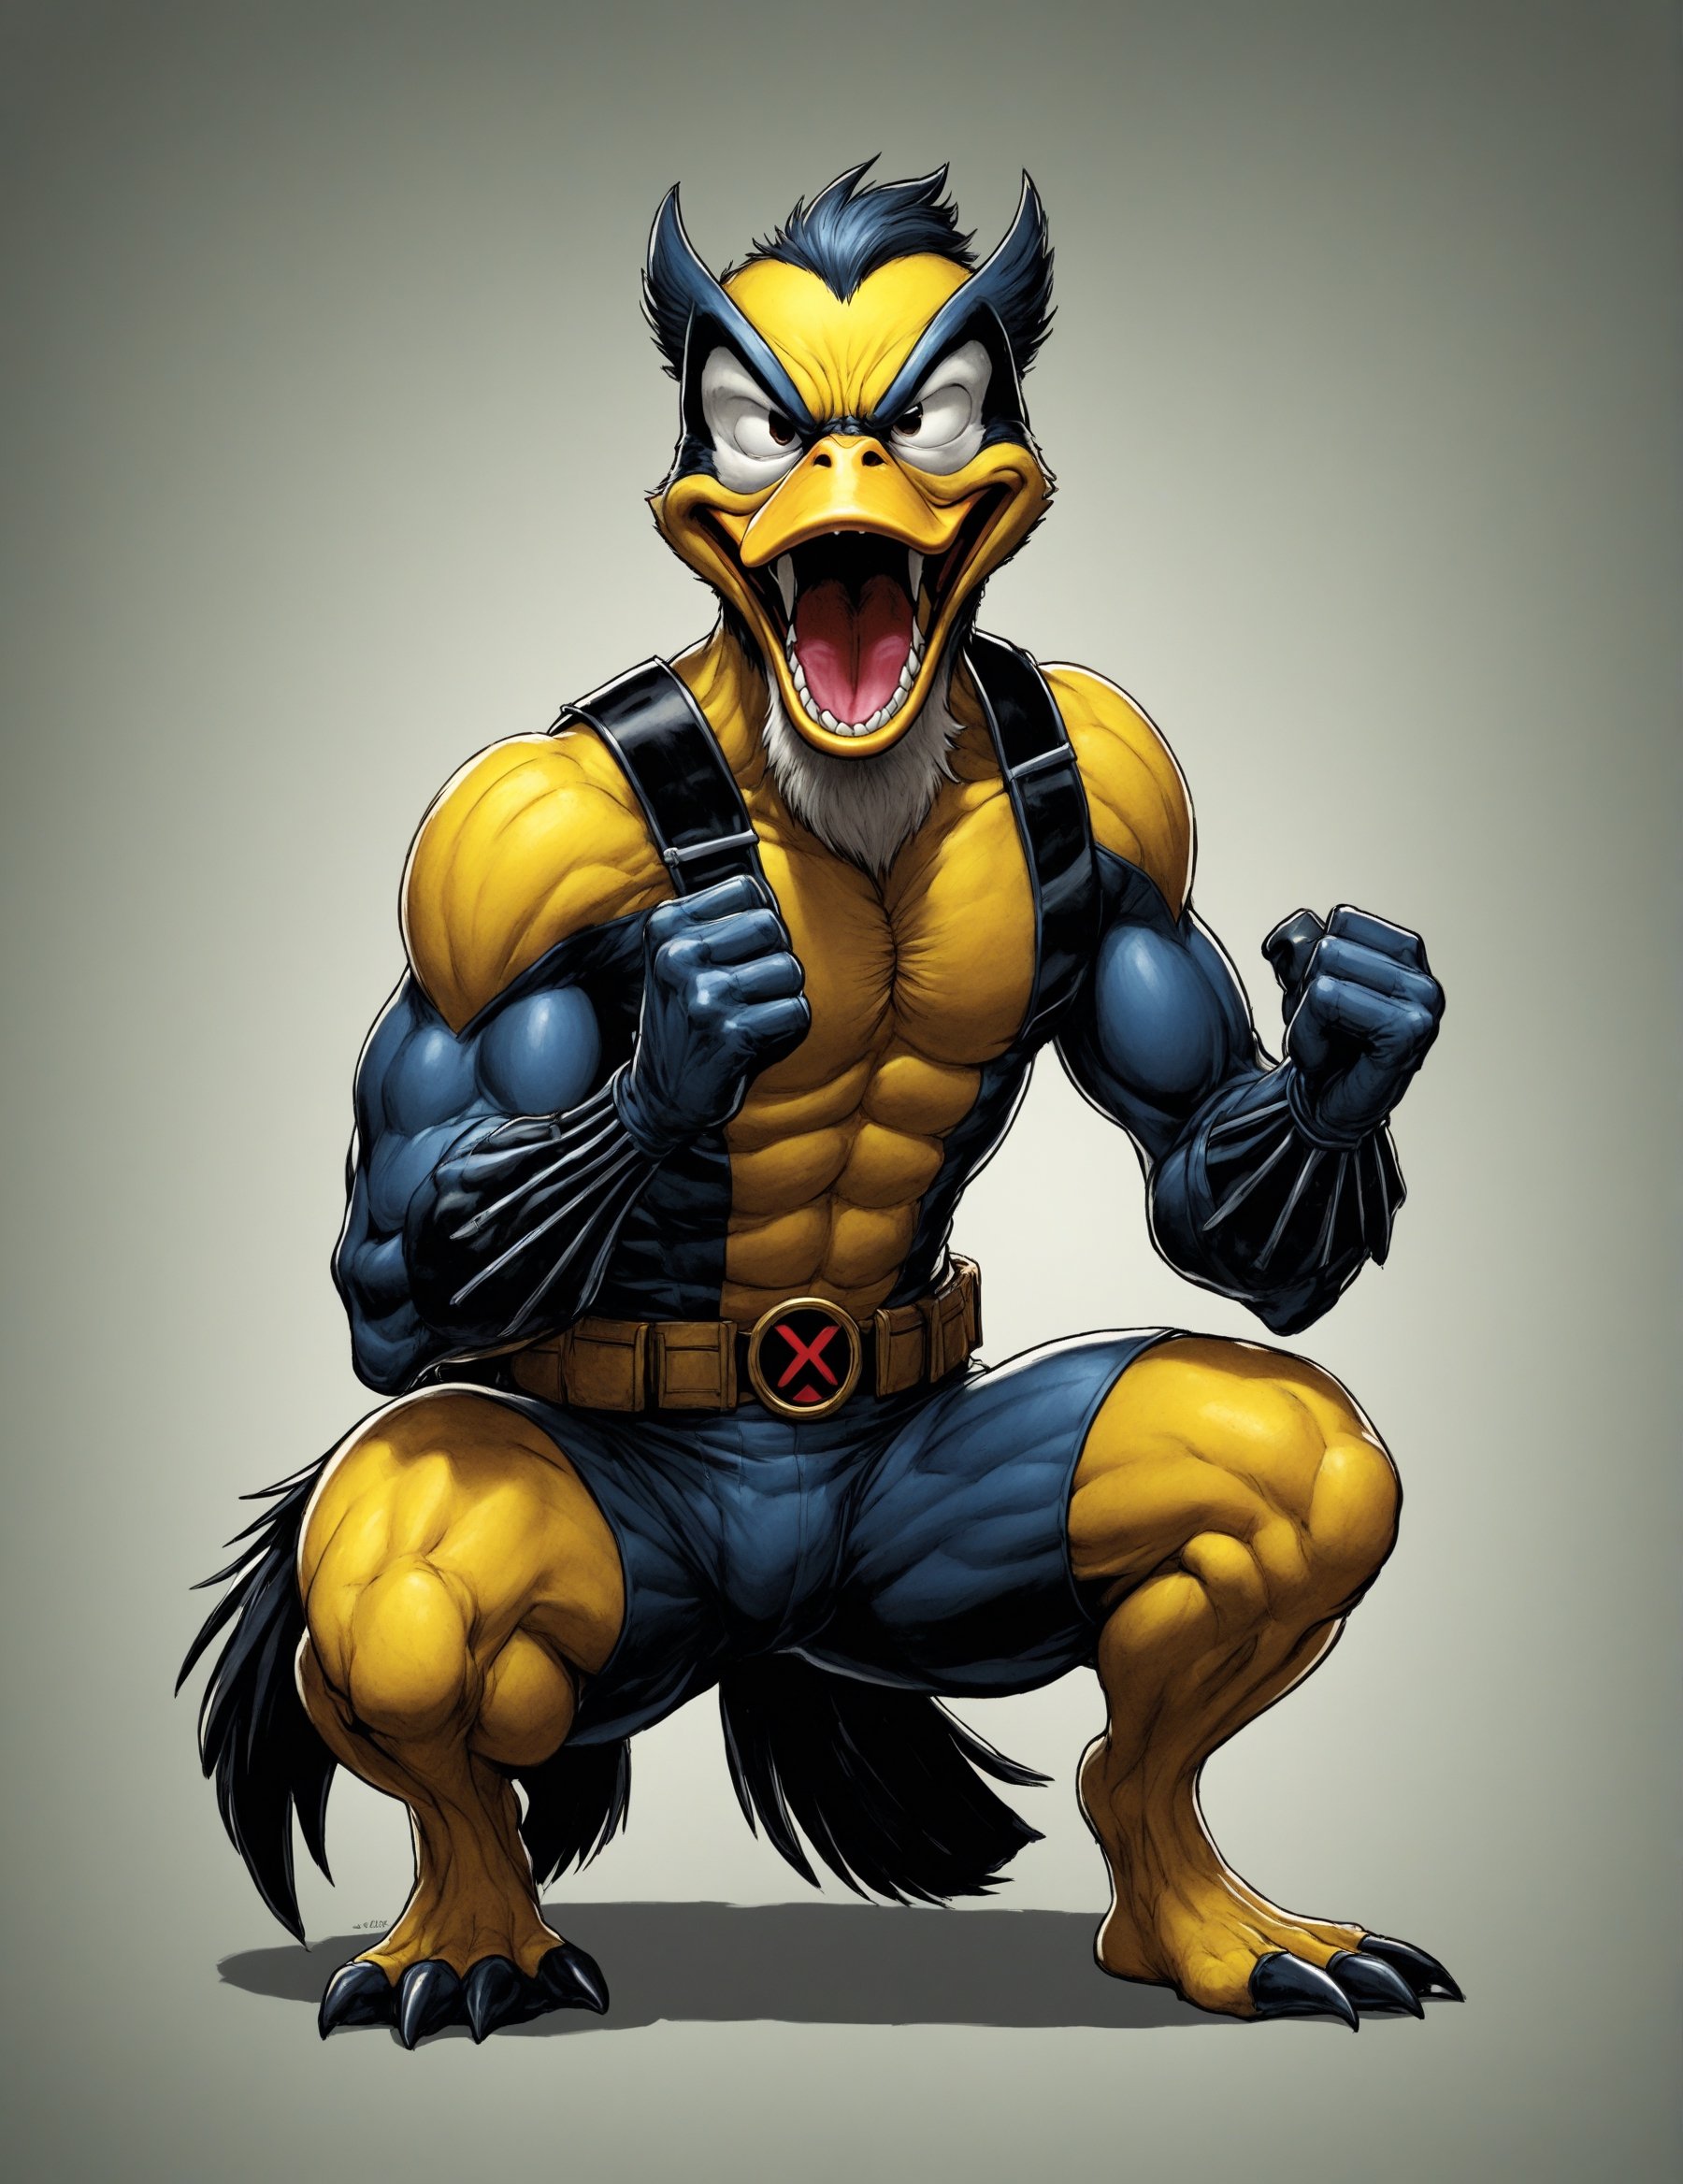 Cartoonish (Angry:1.2) looking Anthropomorphic Duck as the (X-men Wolverine:1.2), his adamantium claws out, on his knees crying, side view, (grinning with bared_teeth:1.2), rubber_hose_character